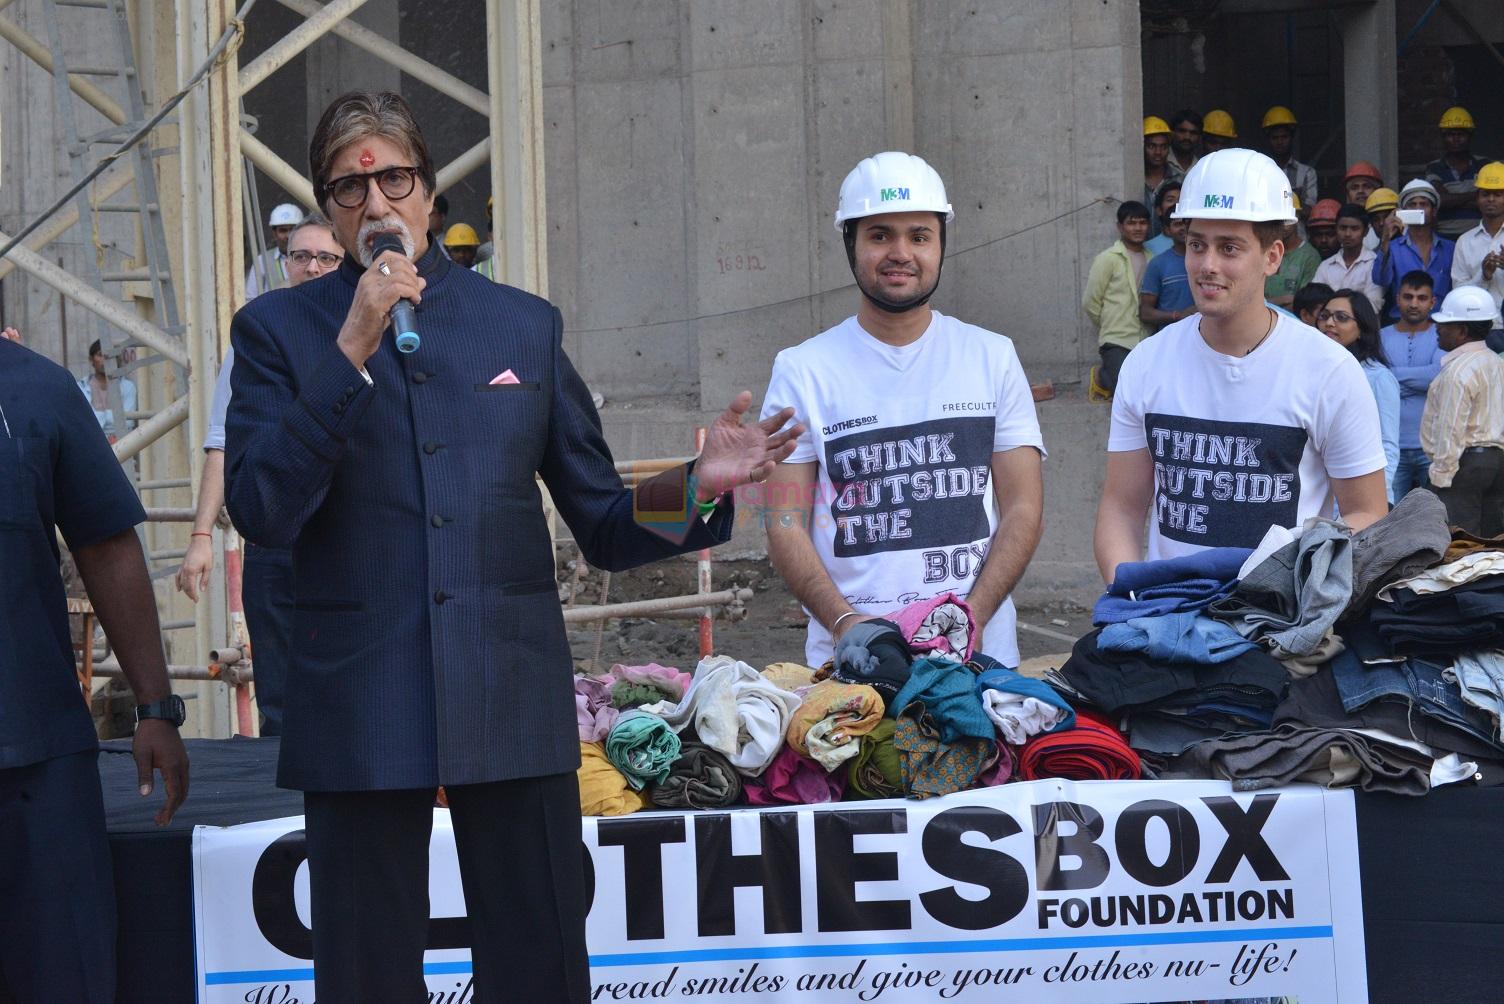 Amitabh Bachchan at Gurgaon construction site for Clothes Box Foundation donation